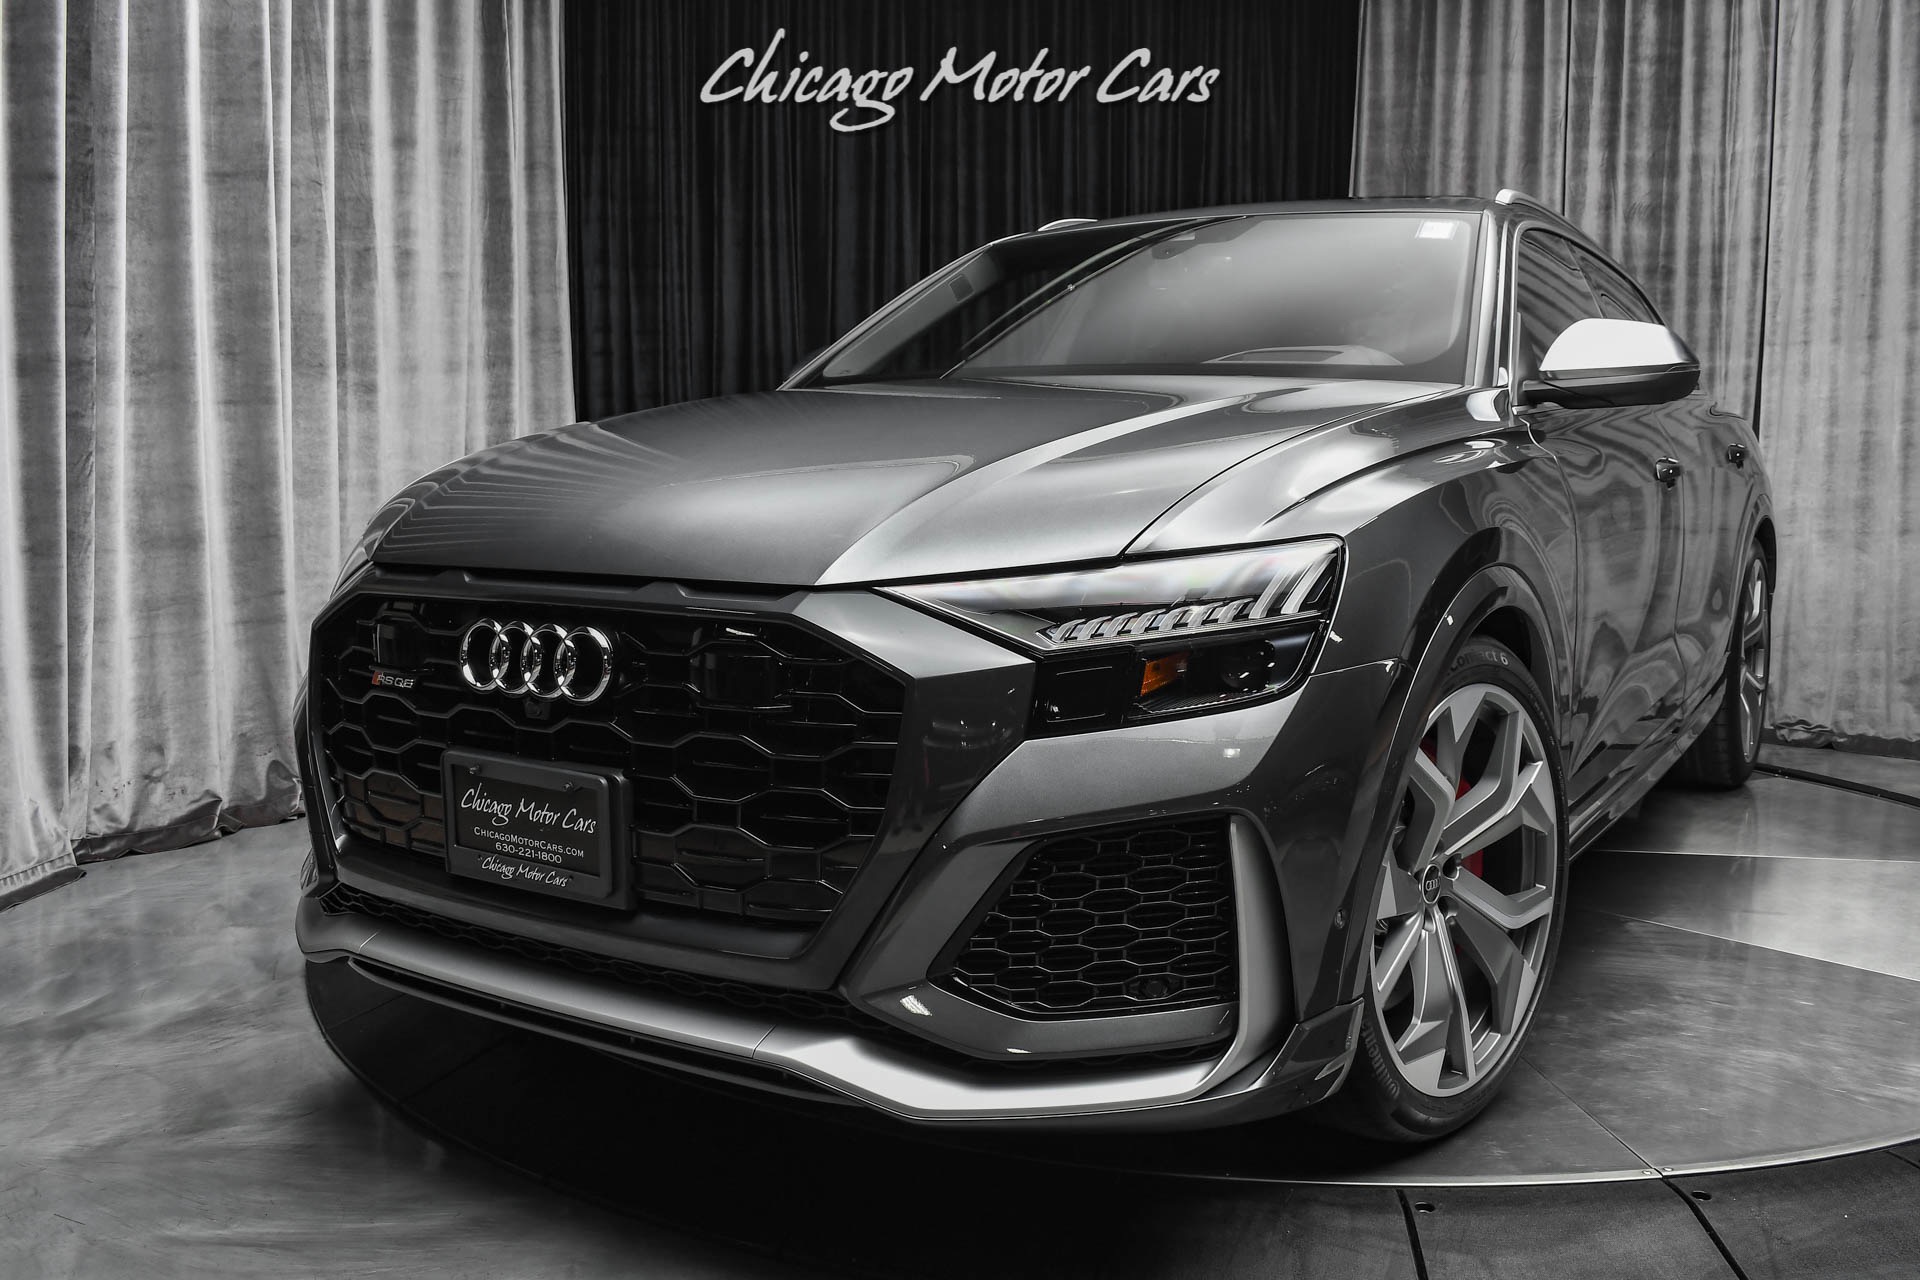 Used-2021-Audi-RS-Q8-40T-Quattro-SUV-EXCELLENT-CONDITION-ONLY-175-MILES-RS-MASSAGE-SEATS